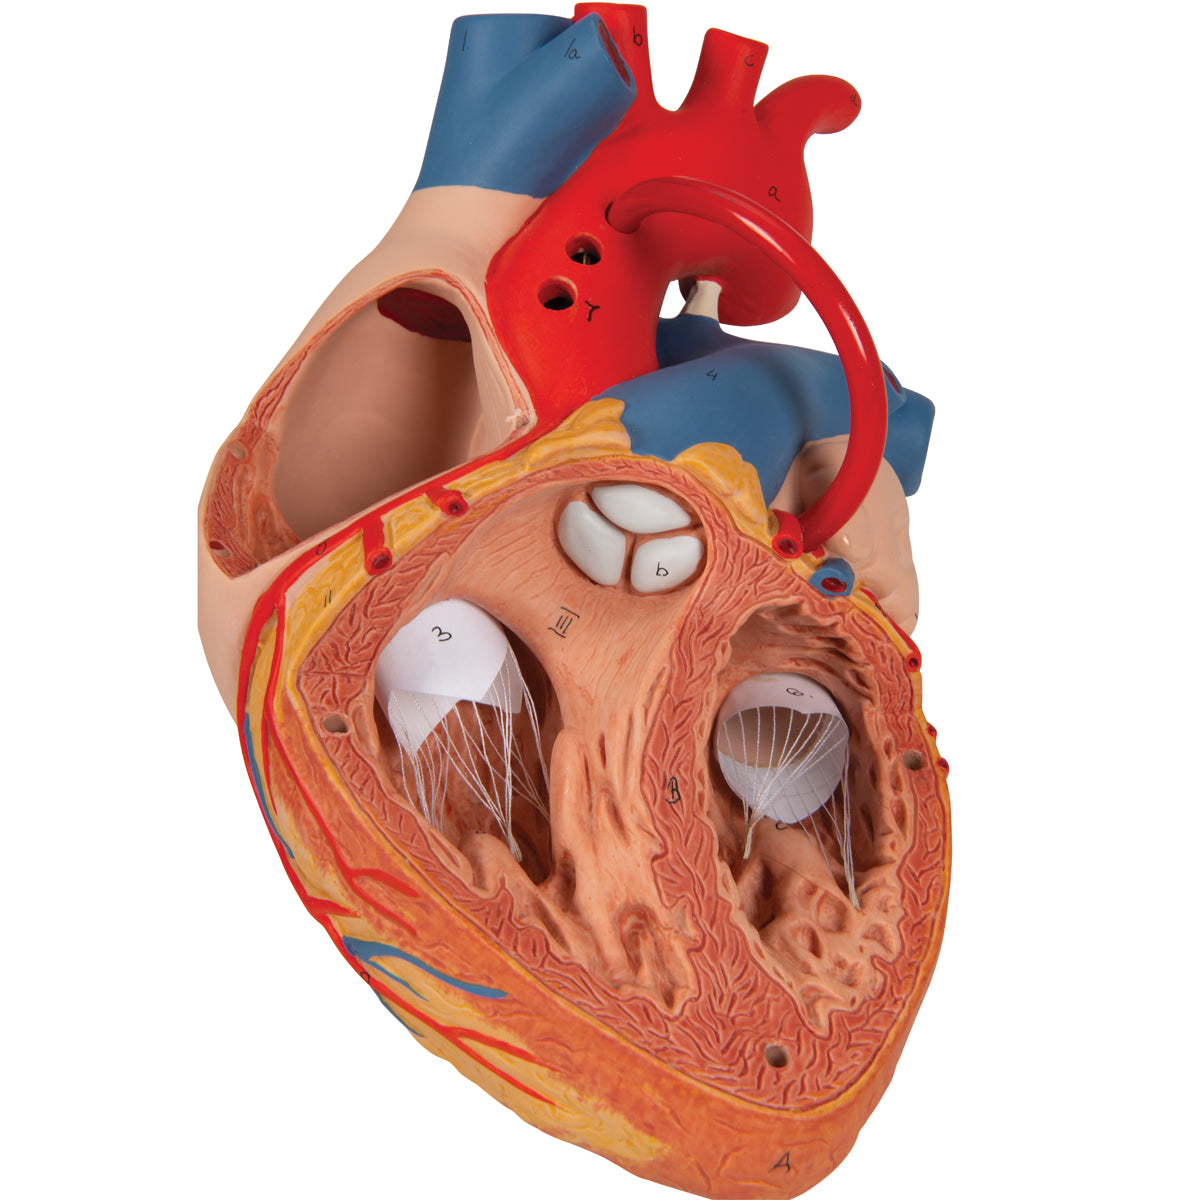 Enlarged heart model showing the result after bypass surgery